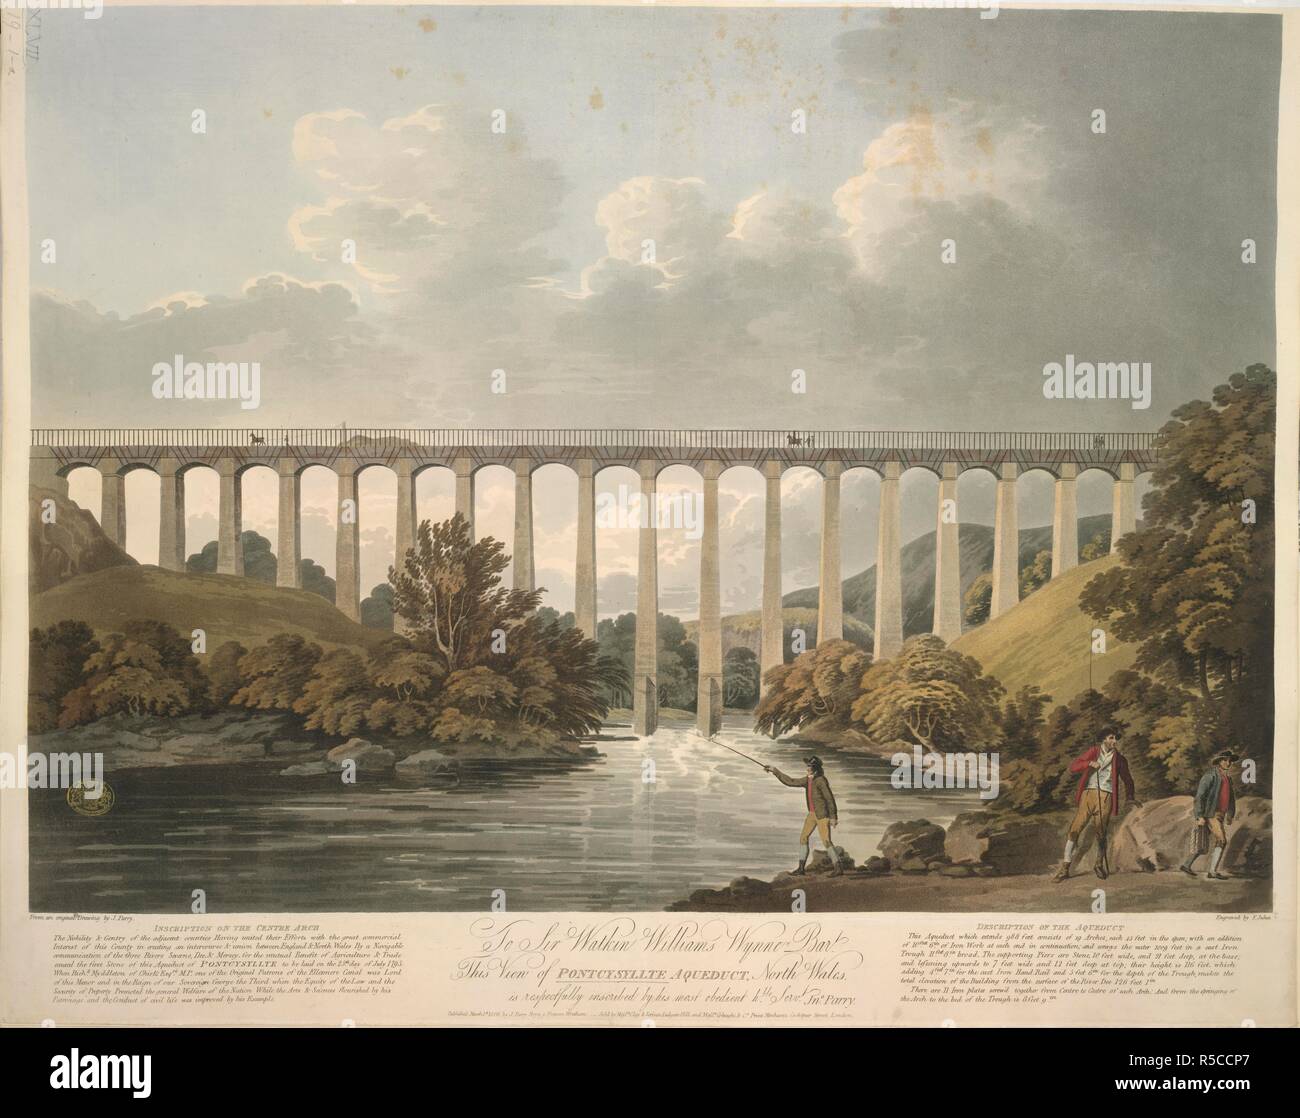 Pontcysyllte Aqueduct. View of Pontcysyllte Aqueduct, North Wales, by I. Parry; engraved by Jukes. . Source: Maps.K.Top.47.19.1.a,. Stock Photo